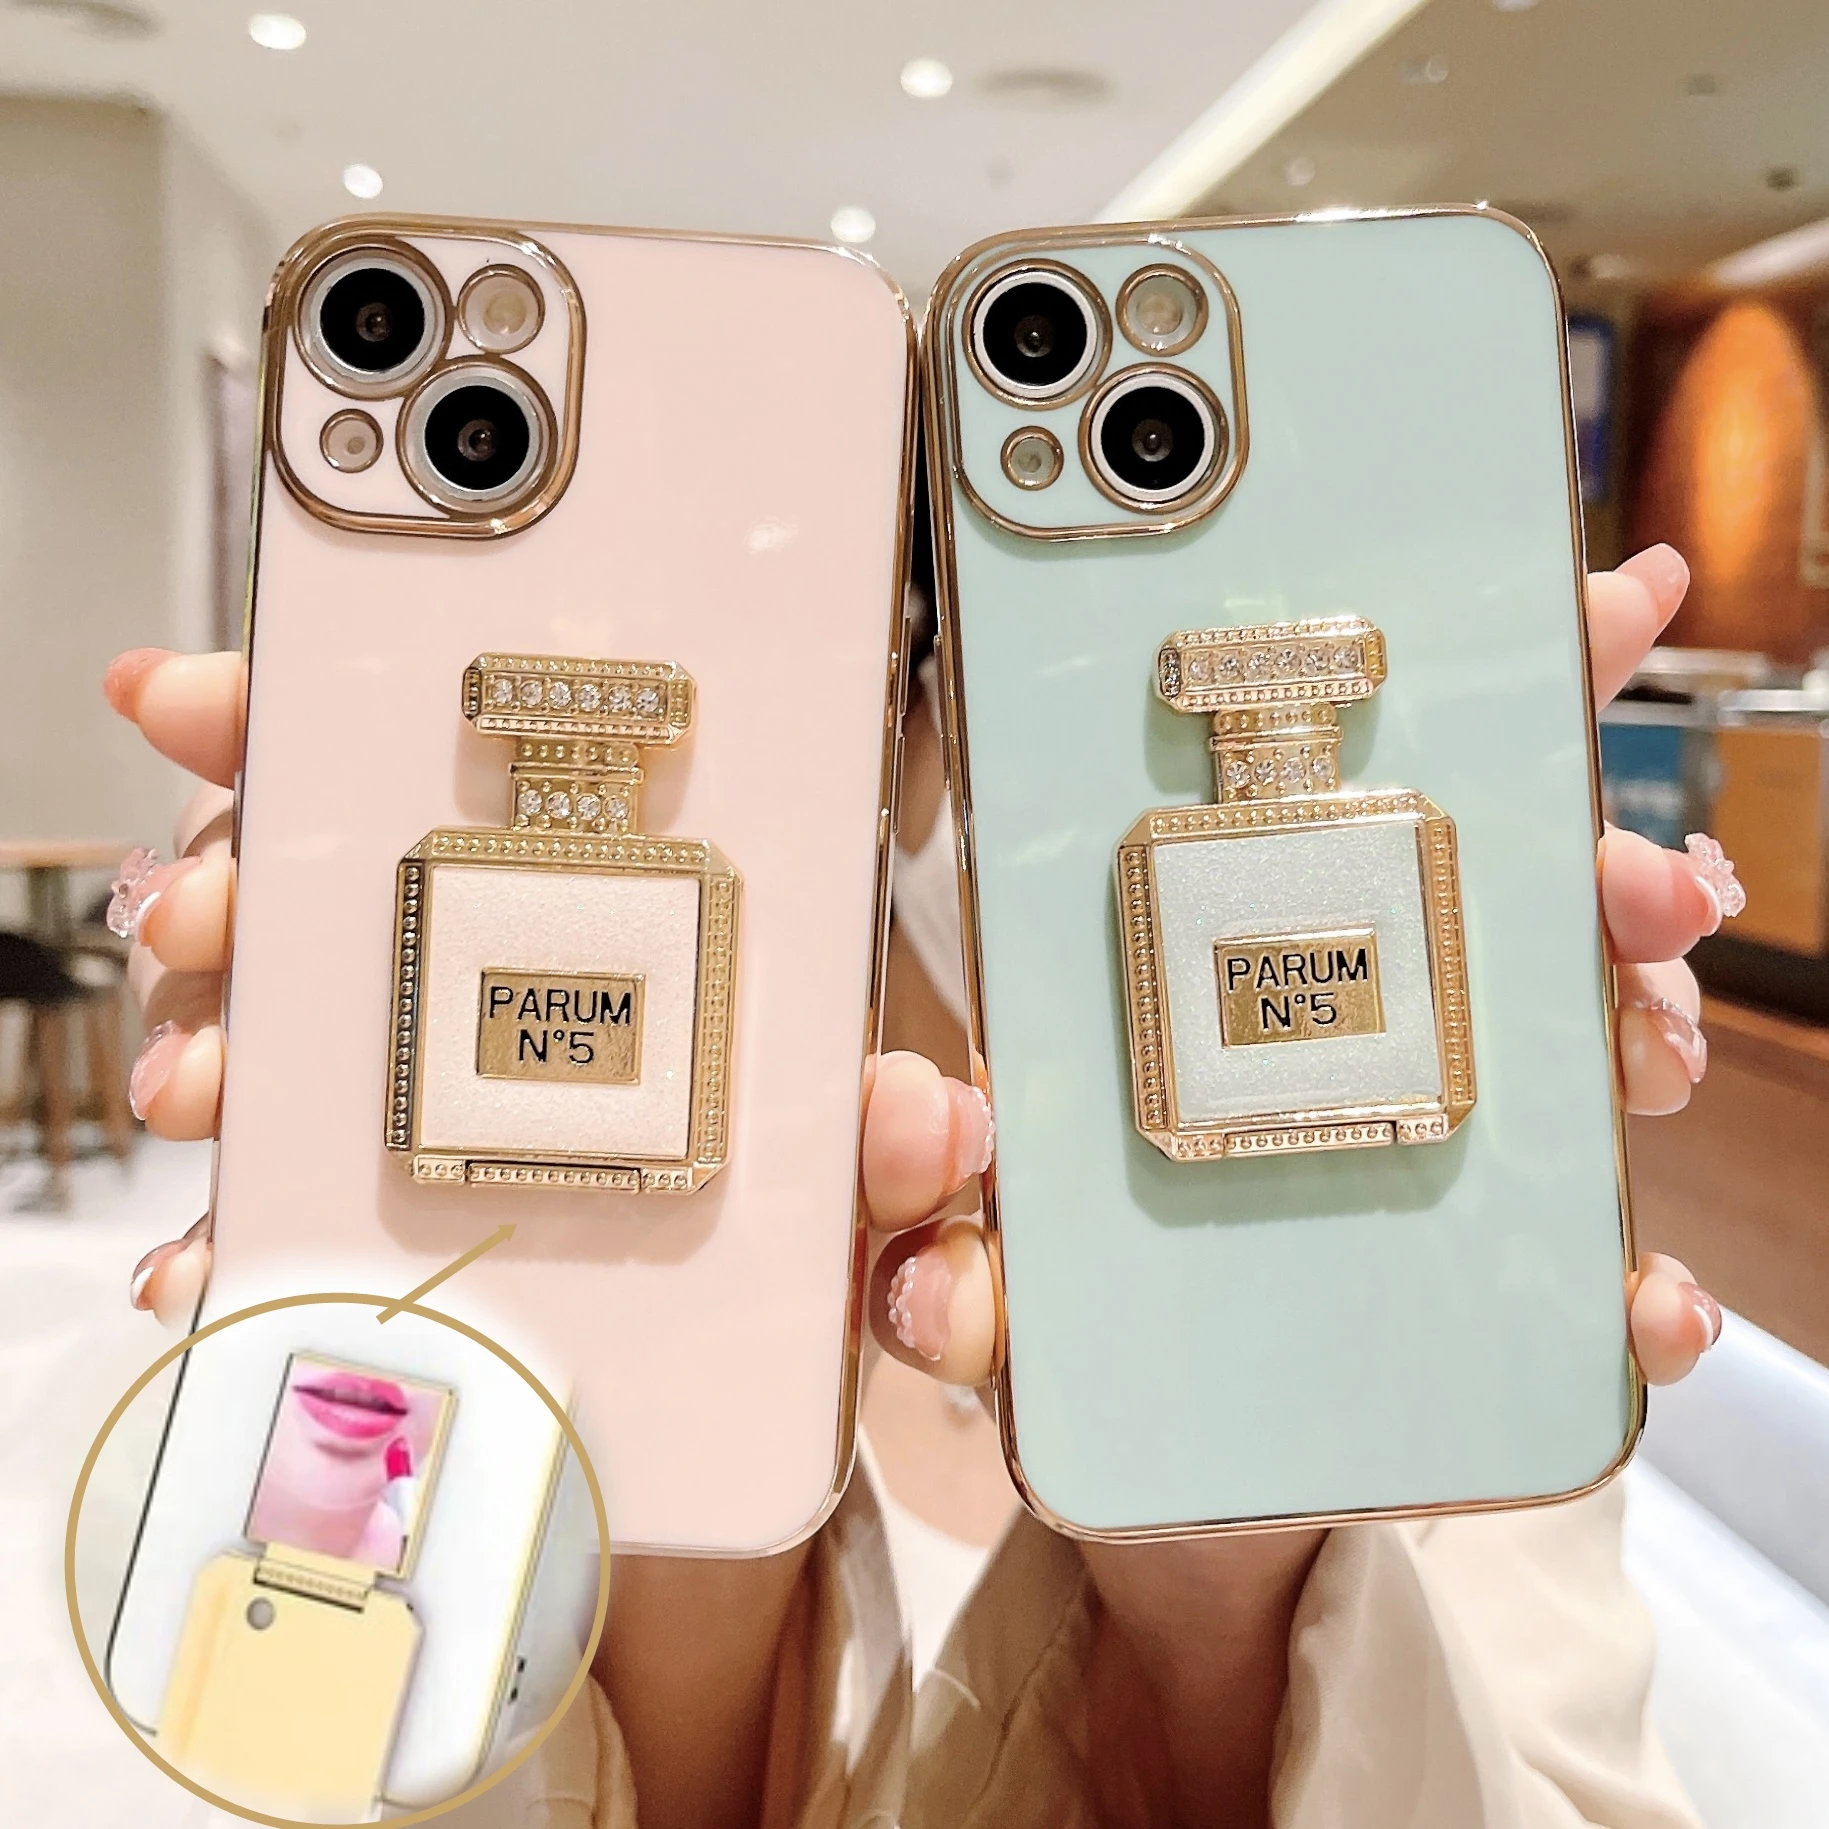 Irresistible Chanel Mobile Phone Cases  Women Love Tech